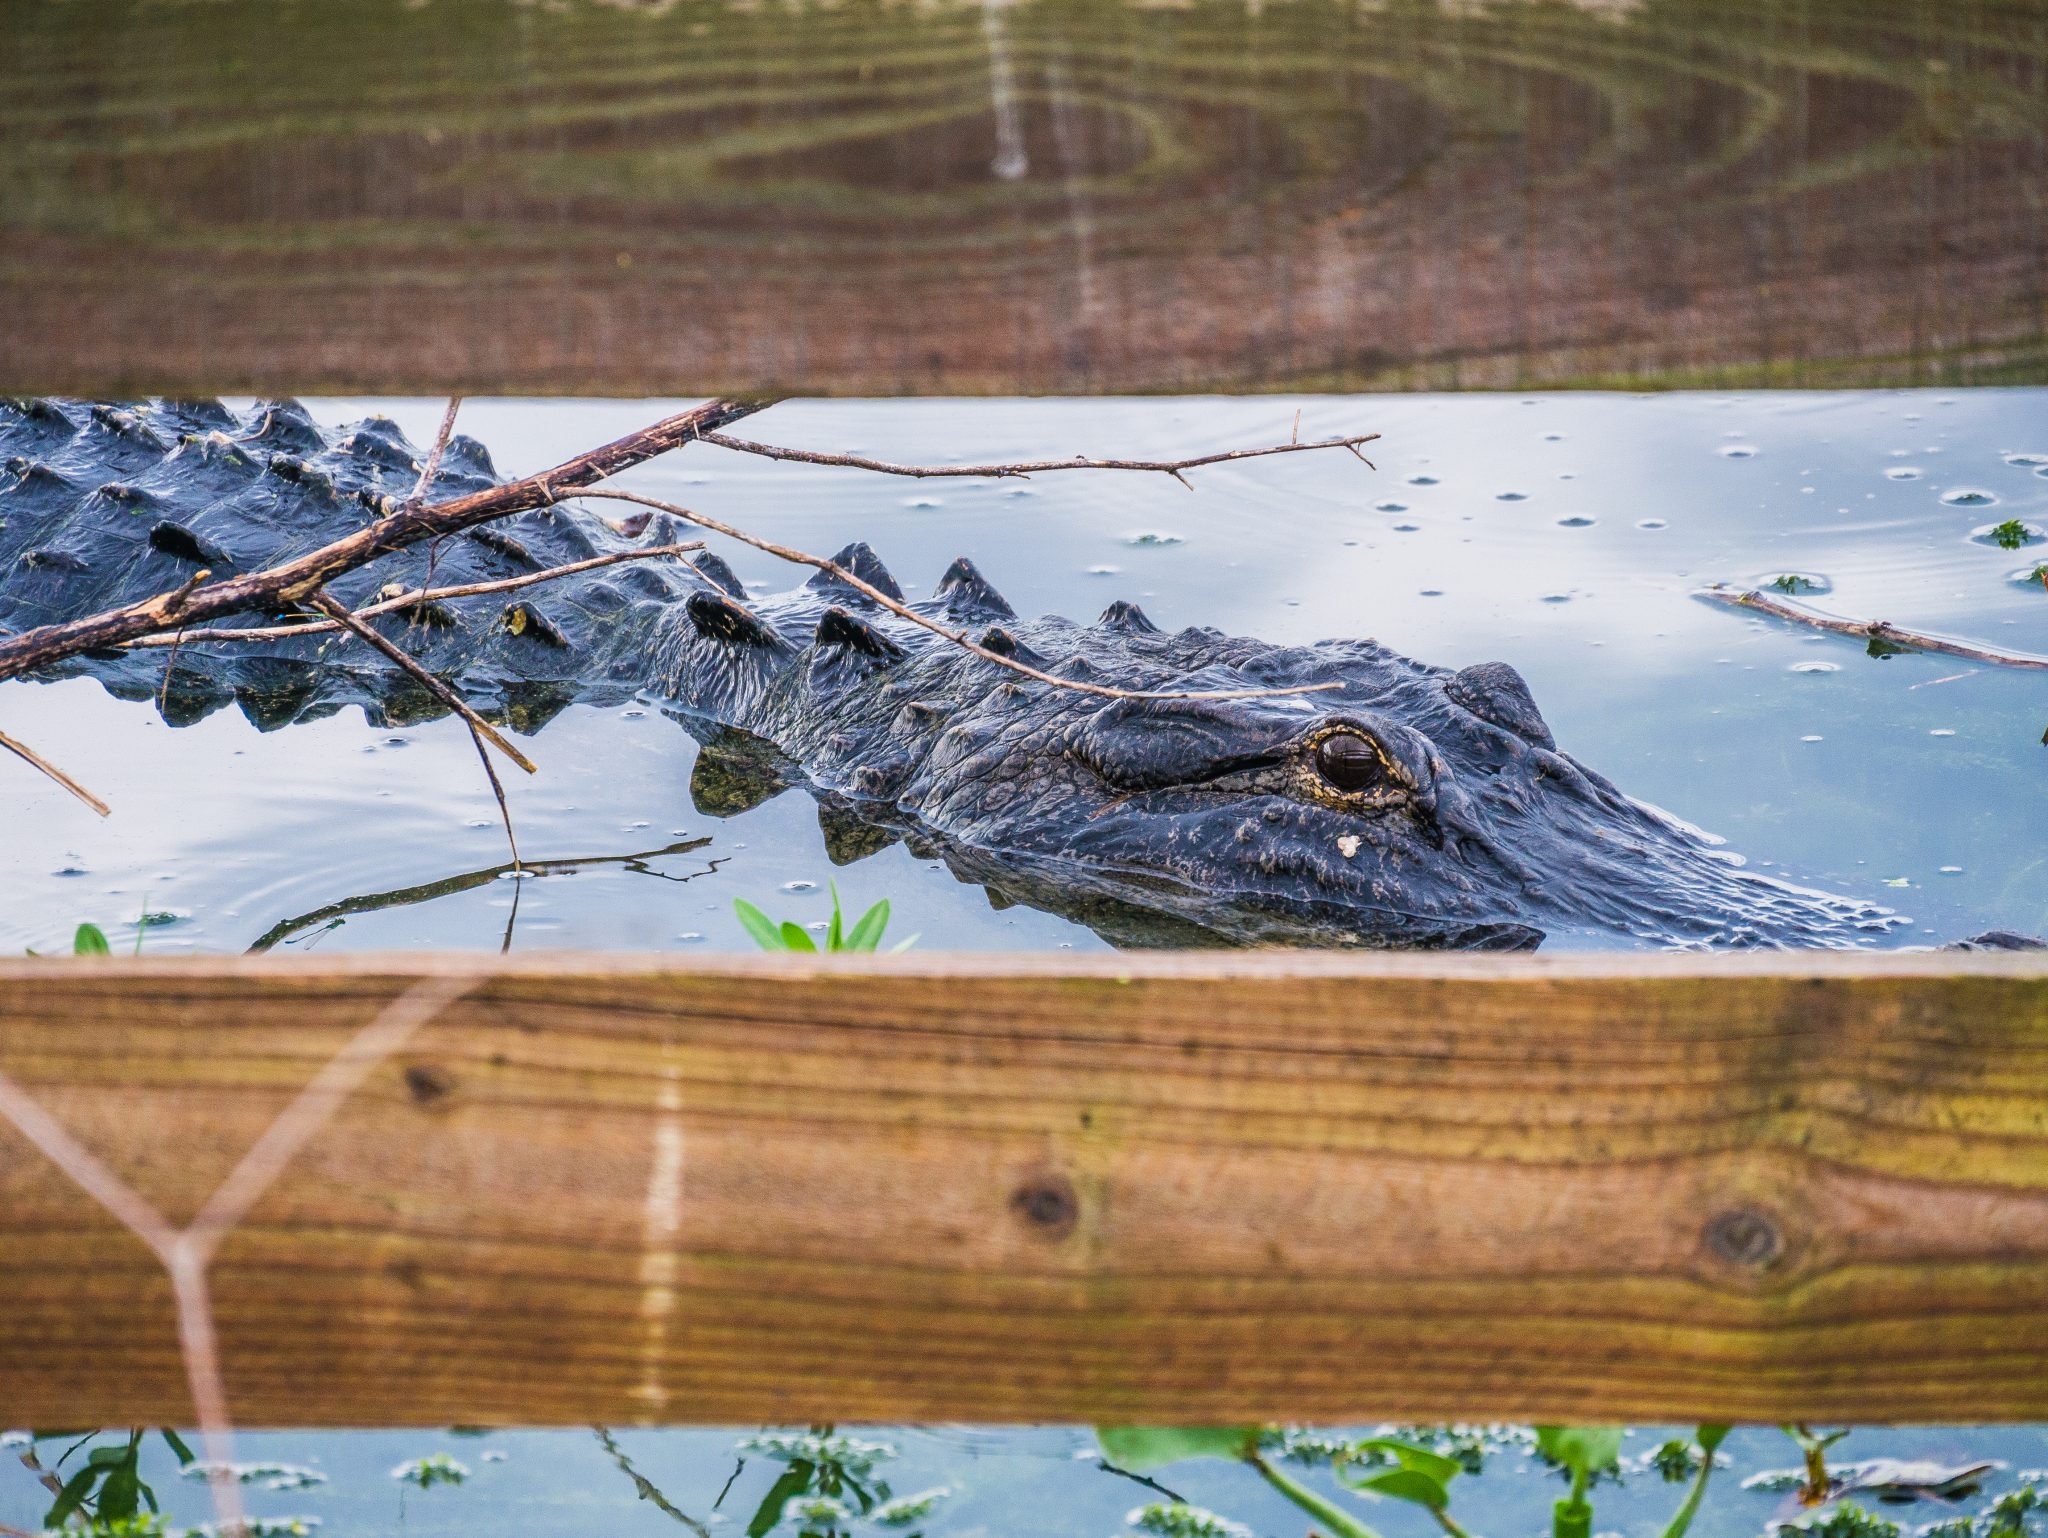 Alligator in the water behind a wooden fence